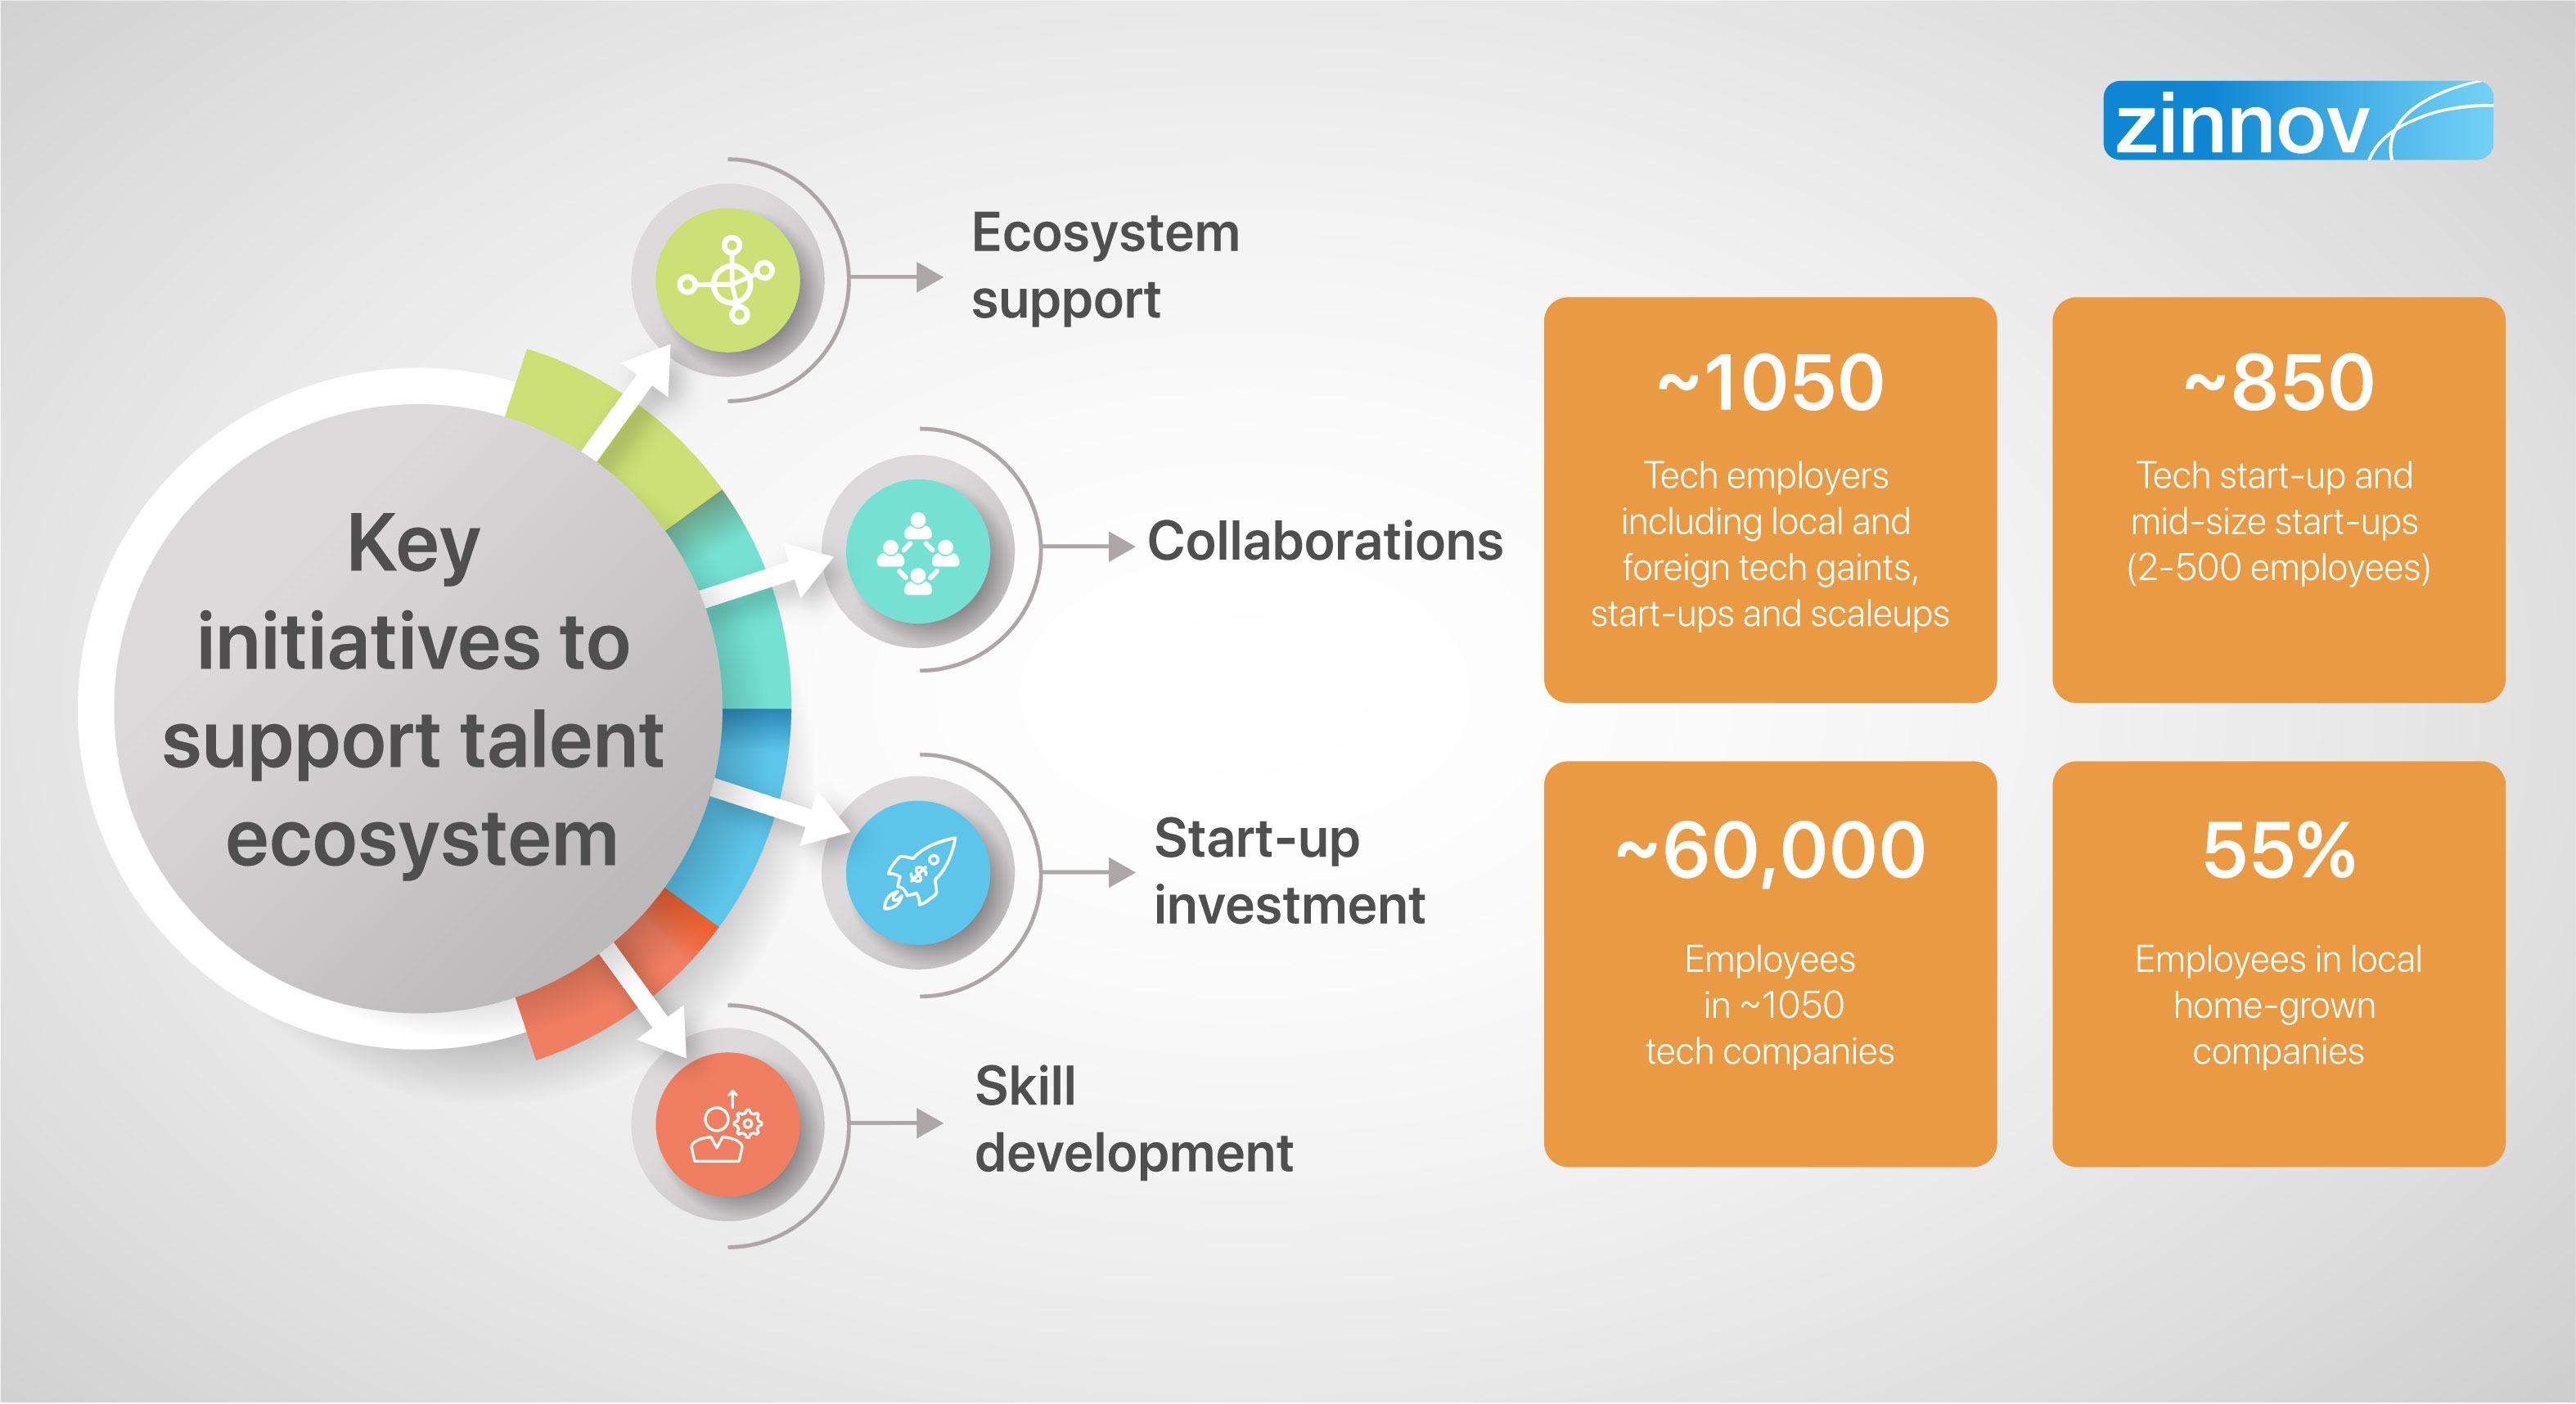 Key initiatives to support talent ecosystem